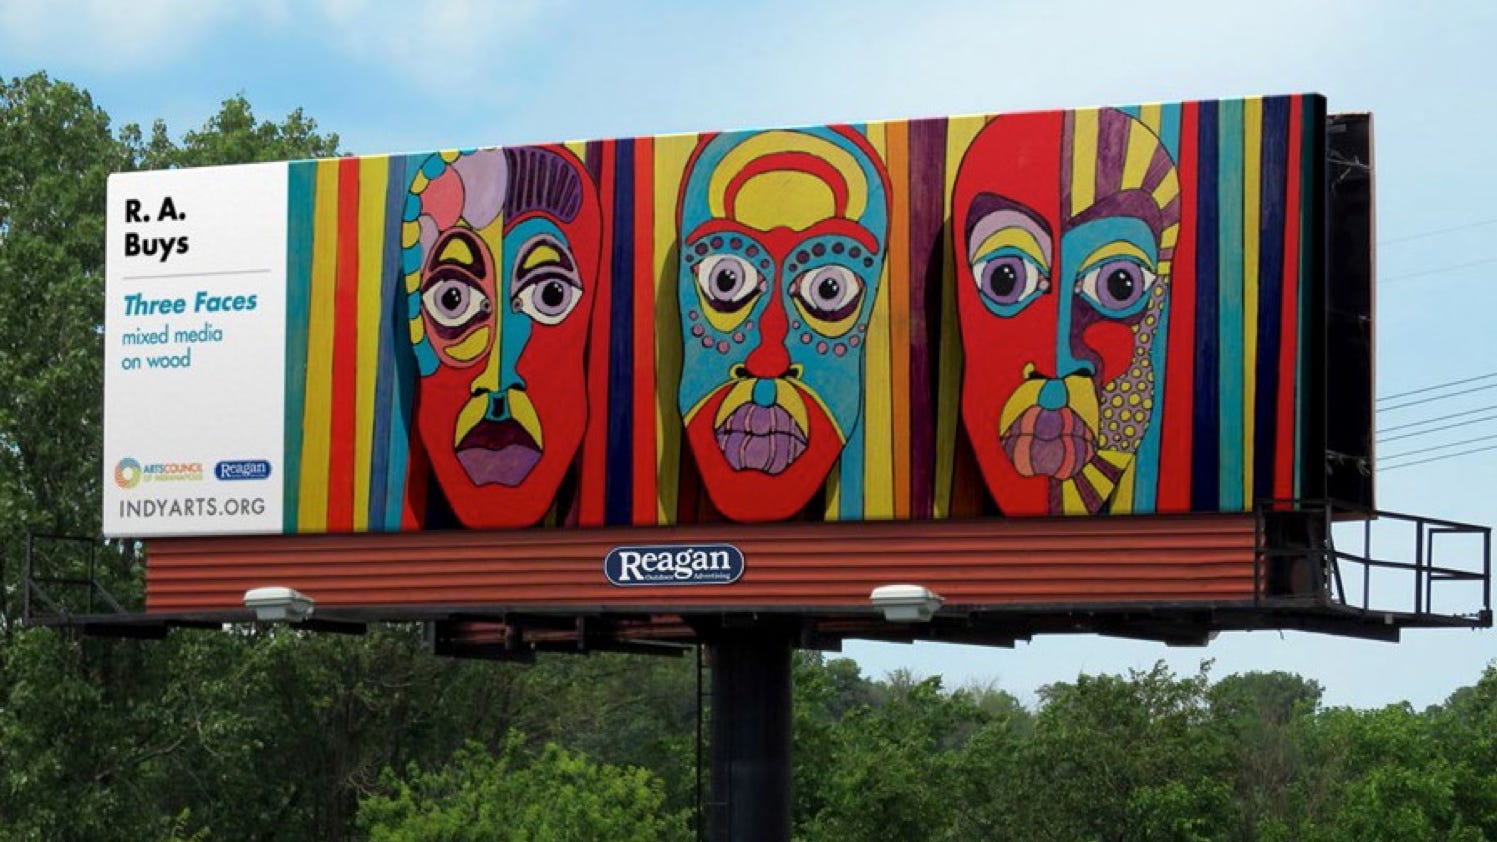 Vote for your favorite 'High Art' billboard in Central Indiana.